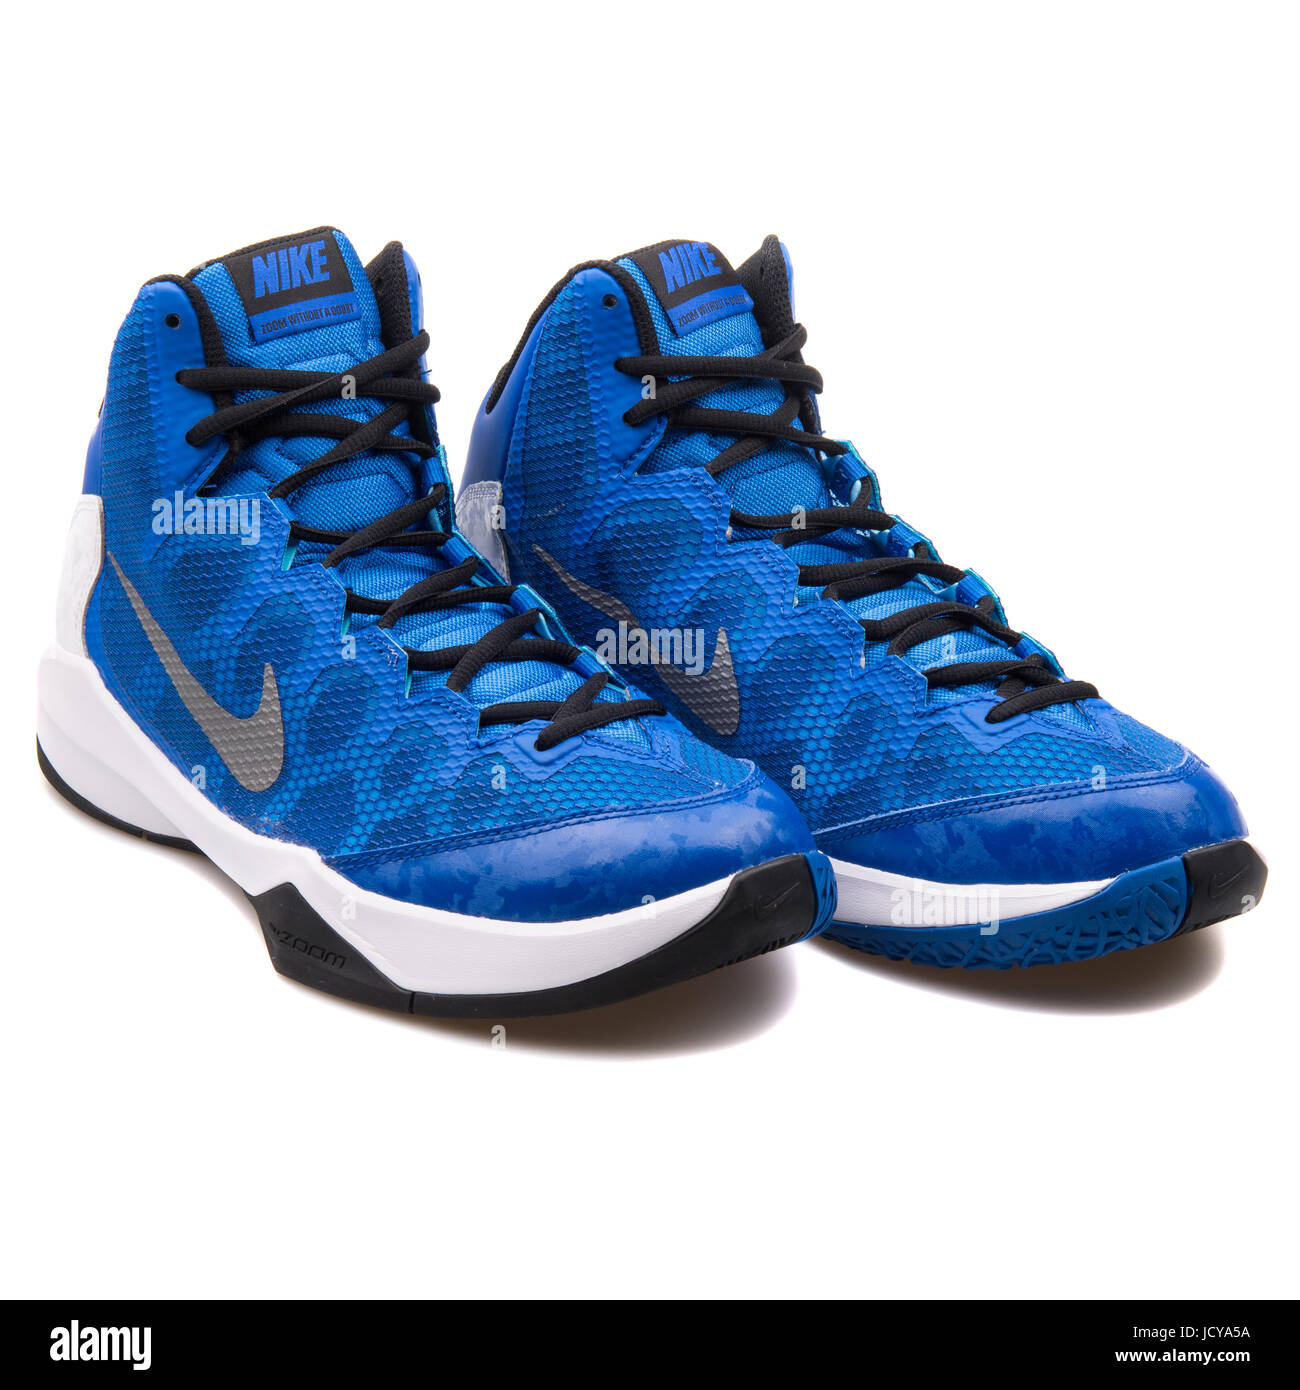 Nike Zoom Without A Doubt Royal Blue 